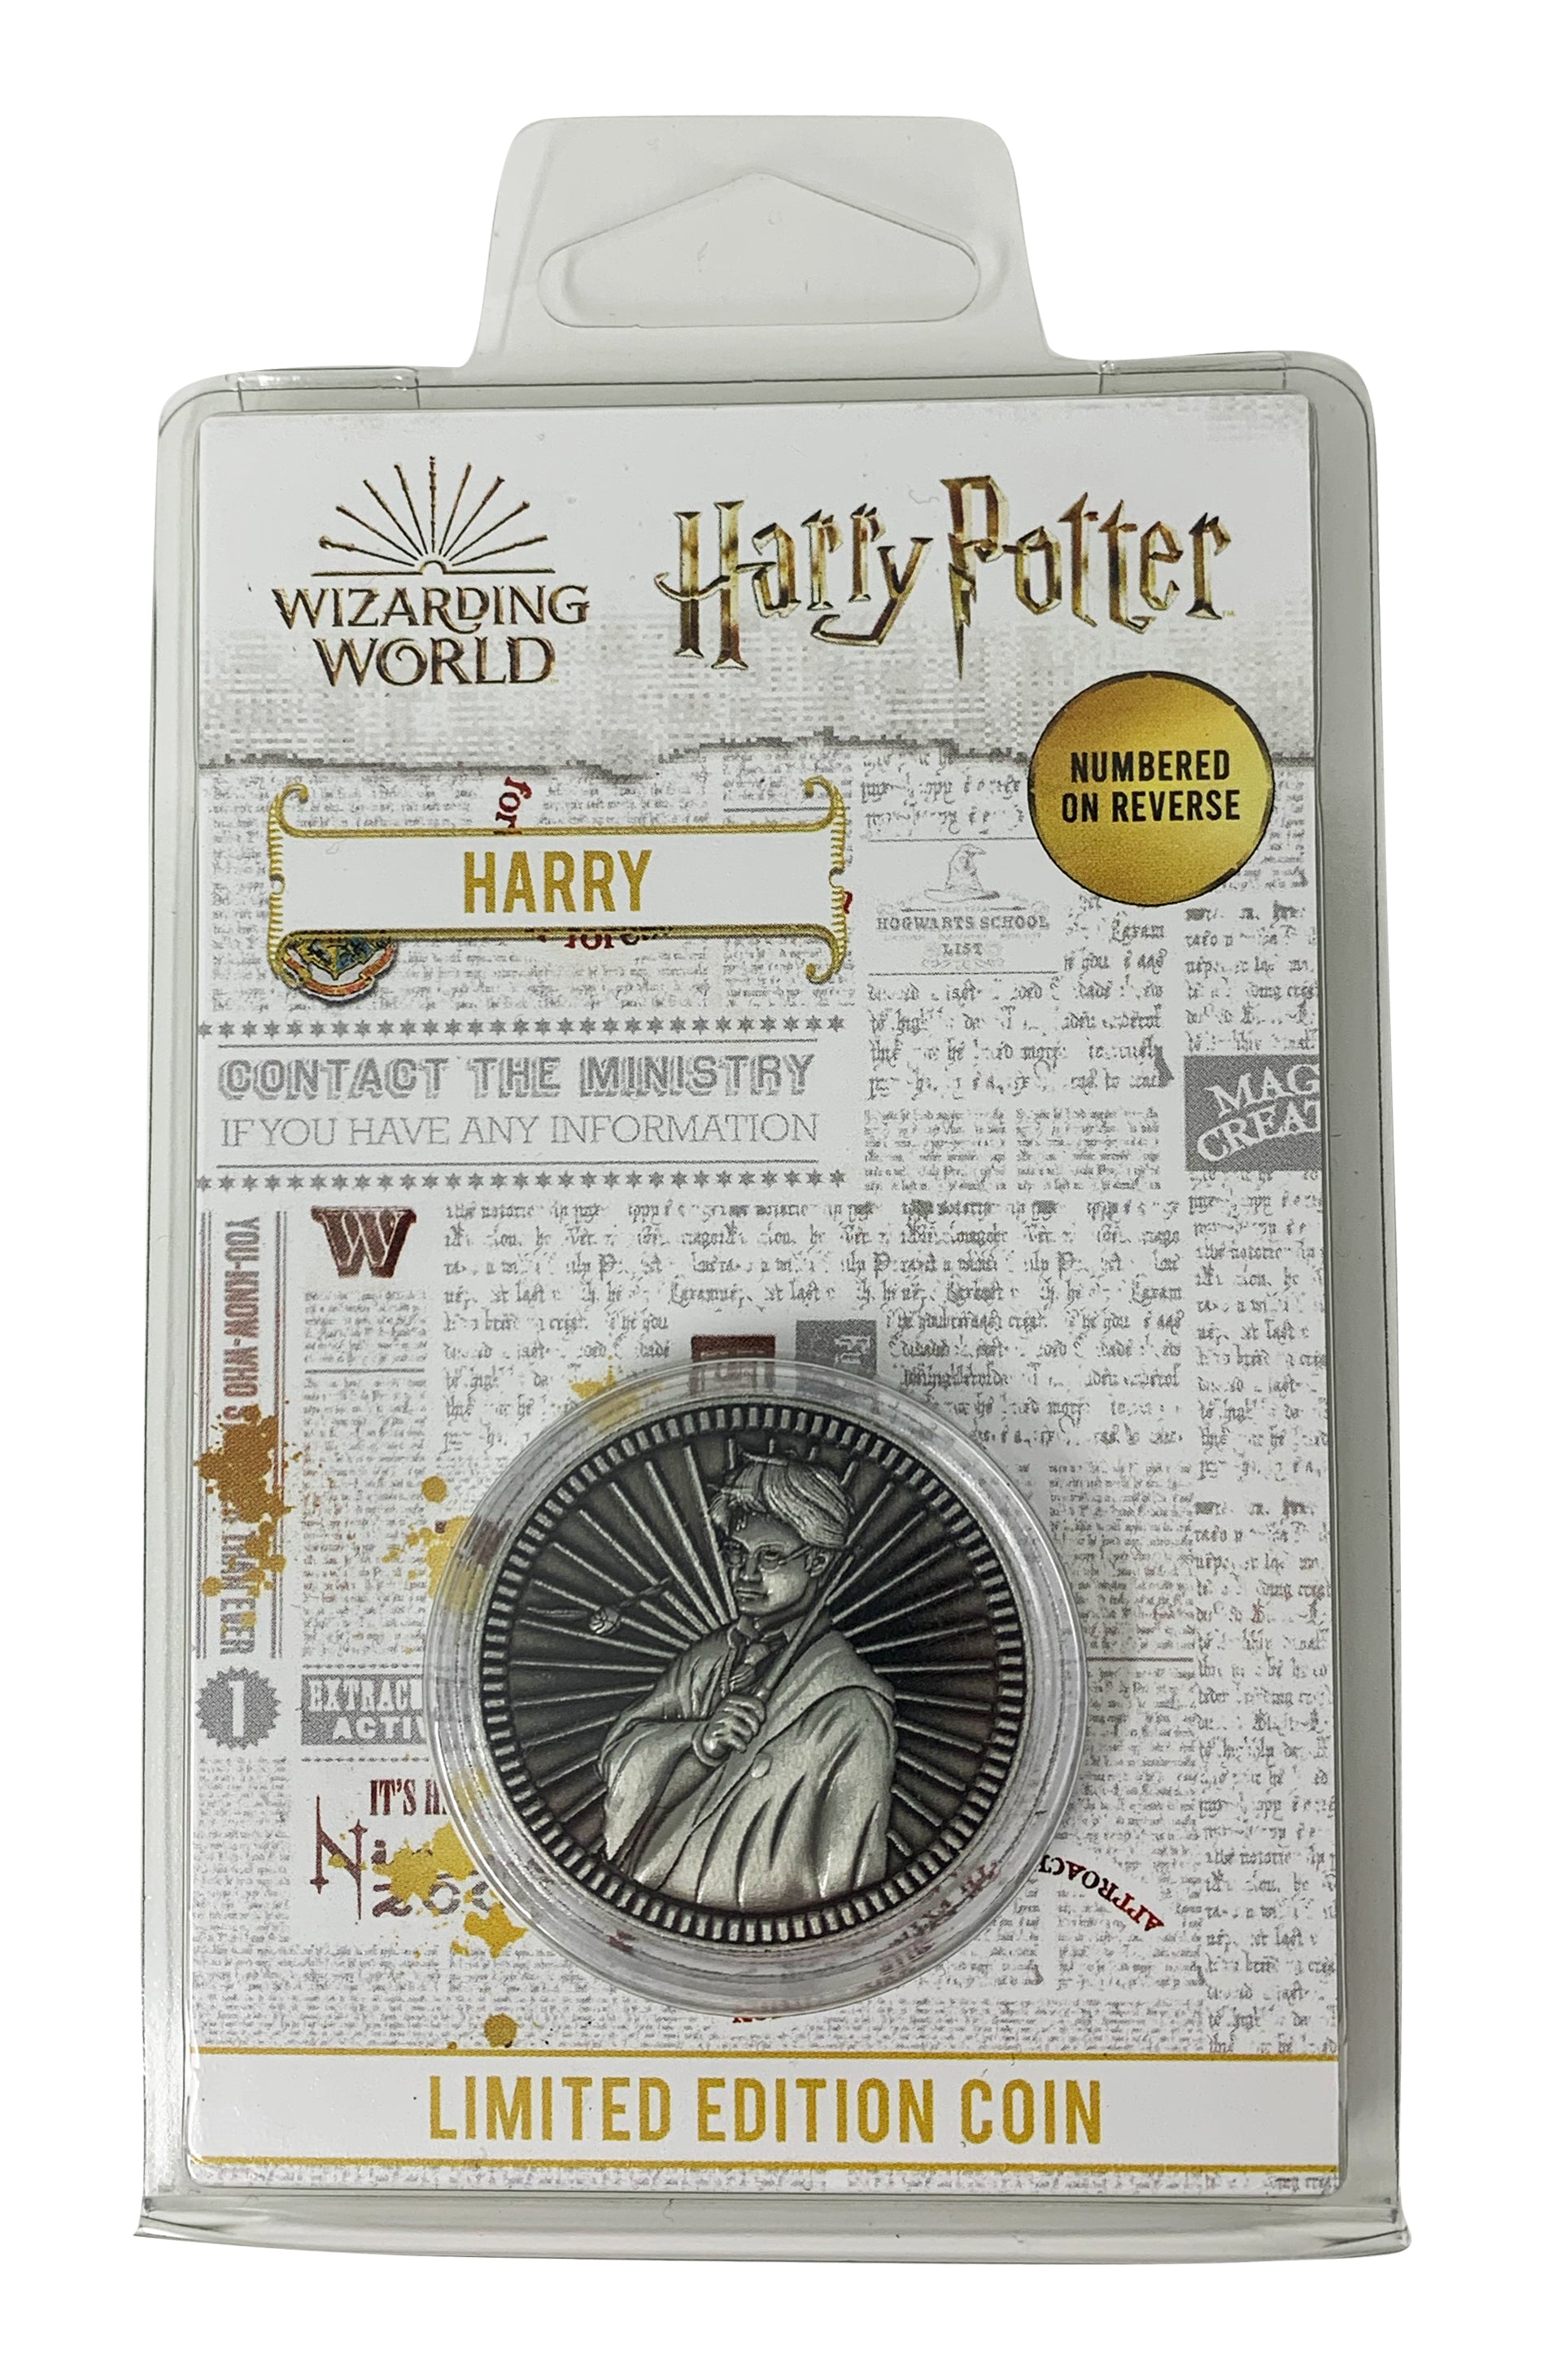 Harry Potter Limited Edition Coin - Harry